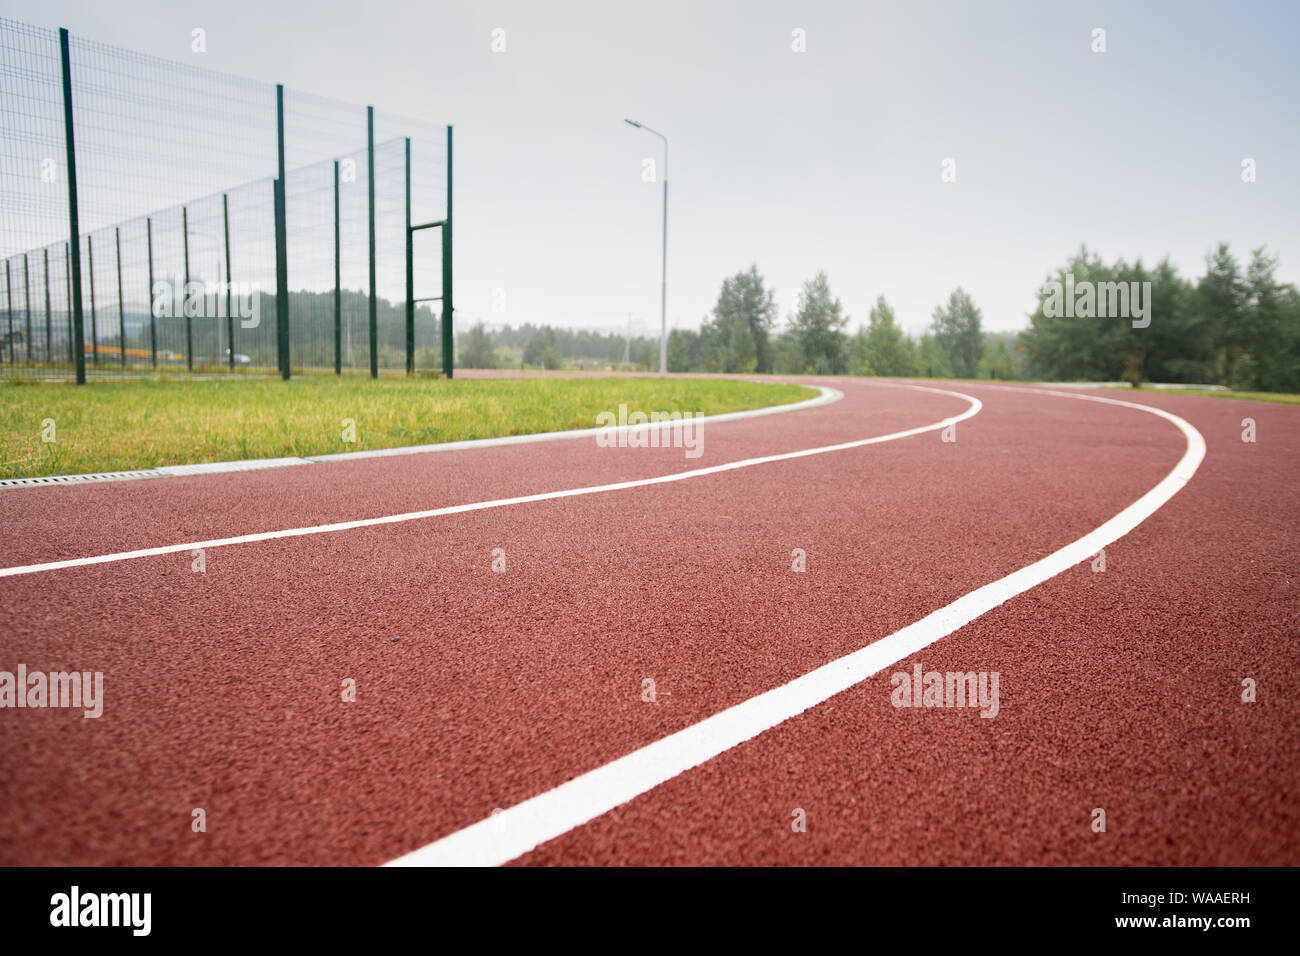 White dividing line making up race tracks in diminishing perspective Stock Photo